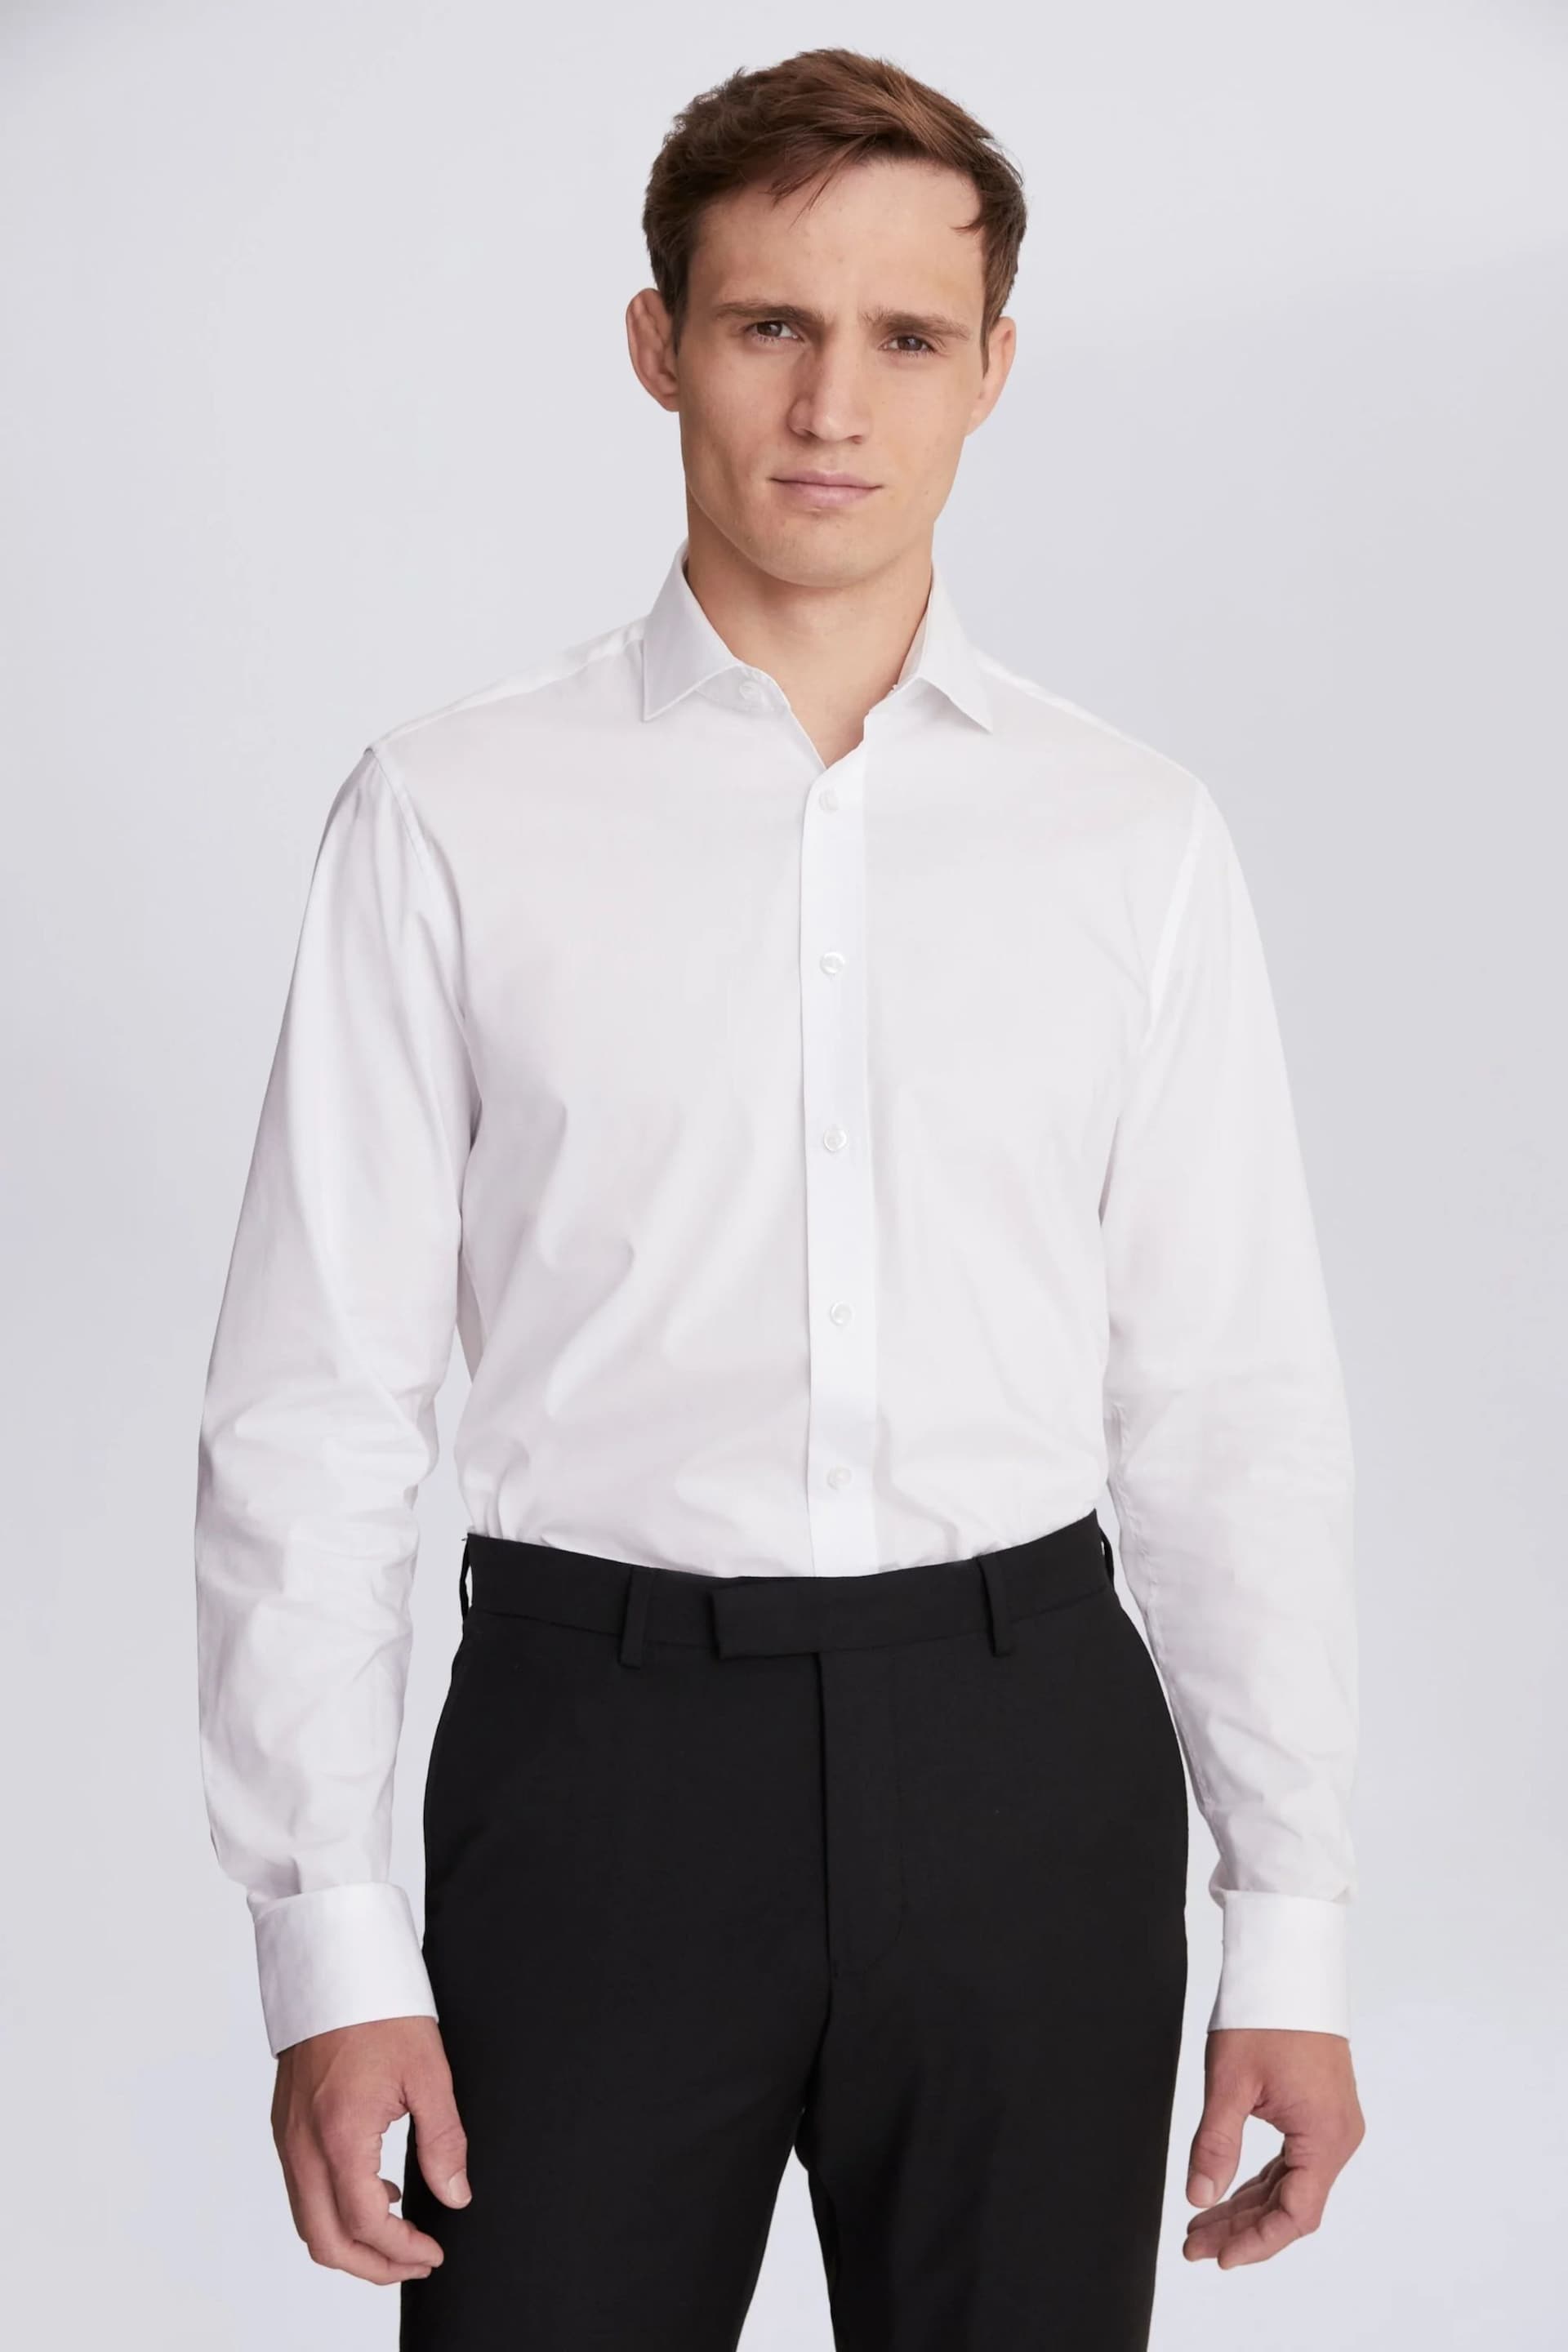 MOSS White Tailored Stretch Shirt - Image 1 of 4